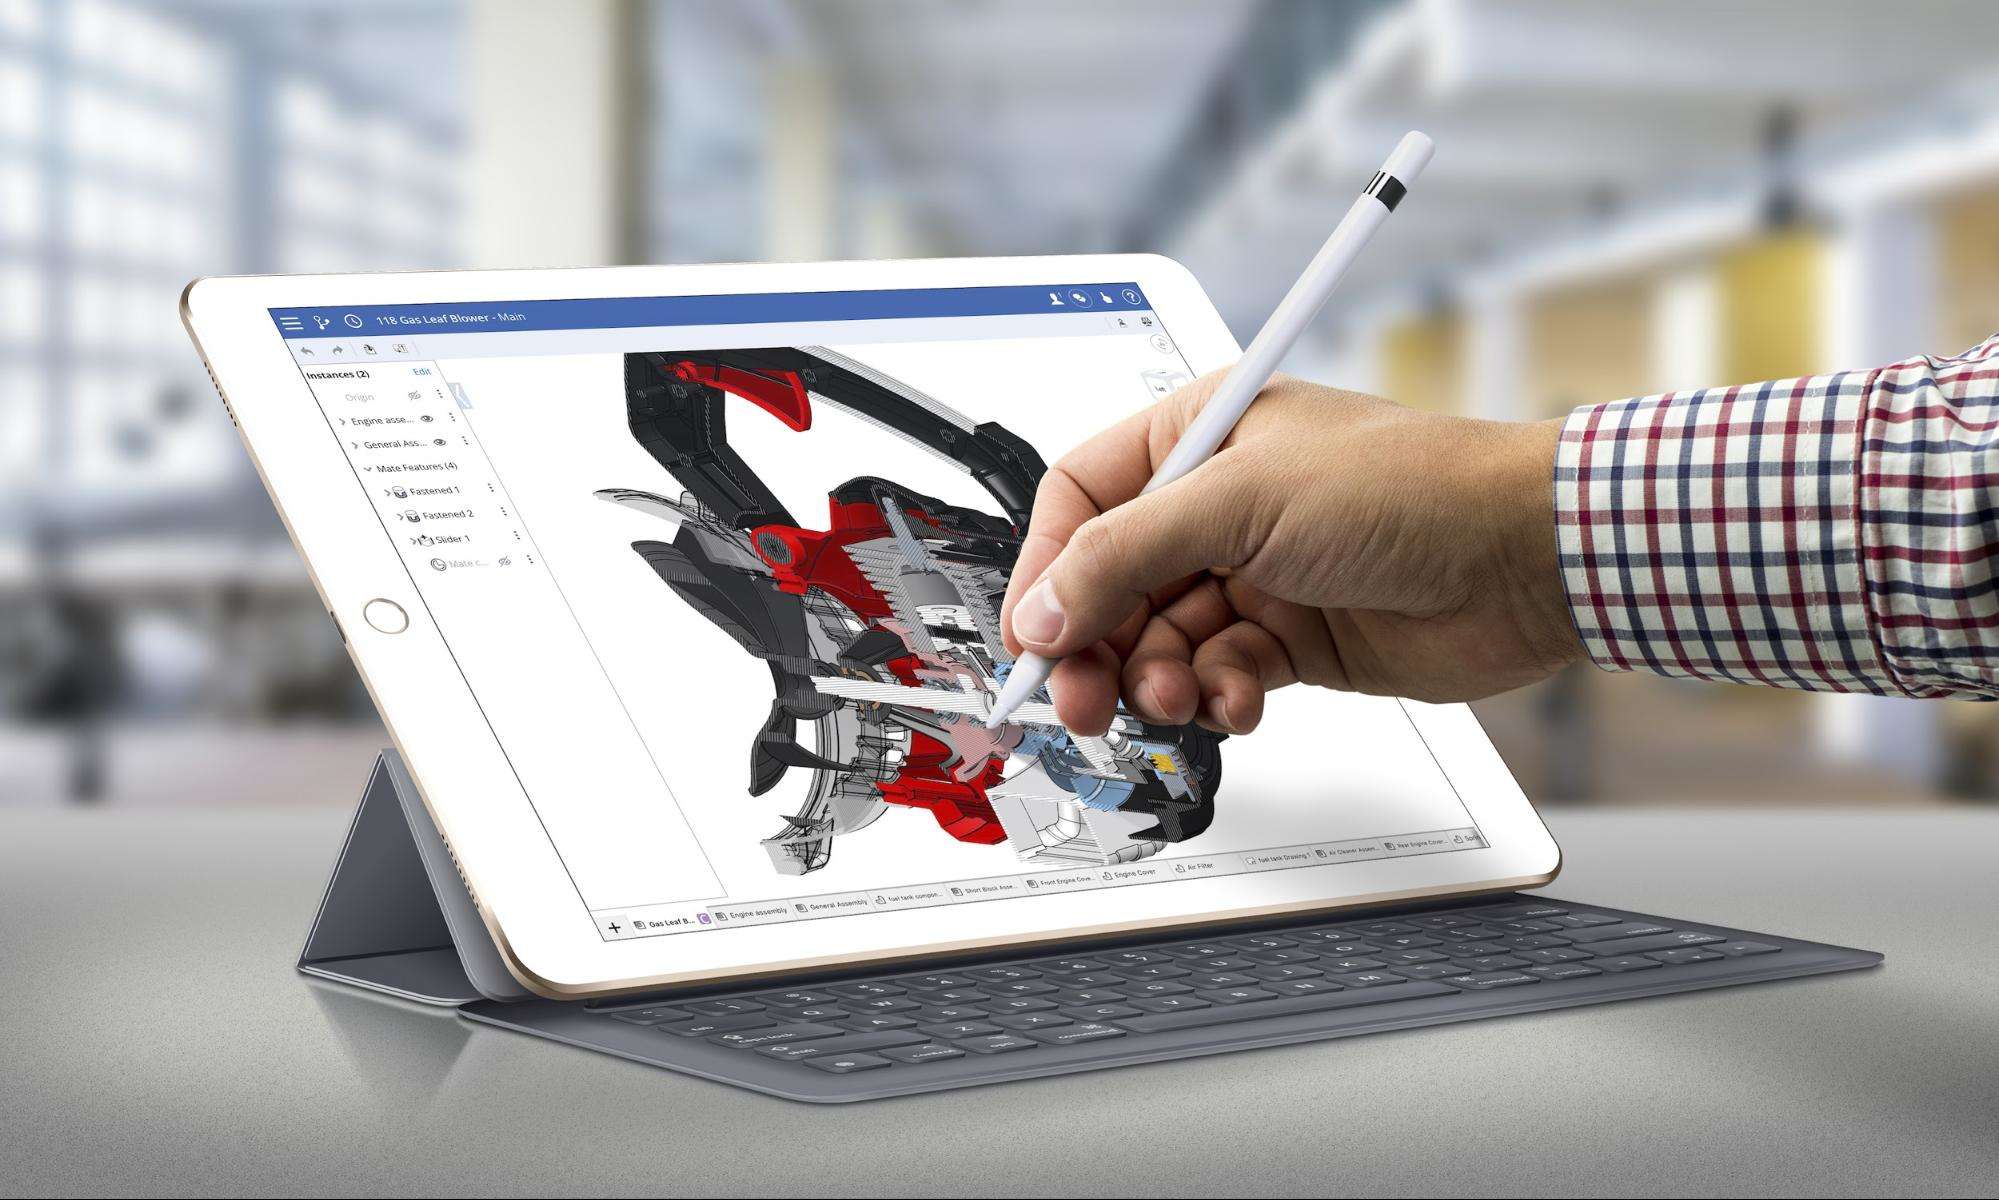 Create detailed 3D models with this amazing CAD app for iPad Pro